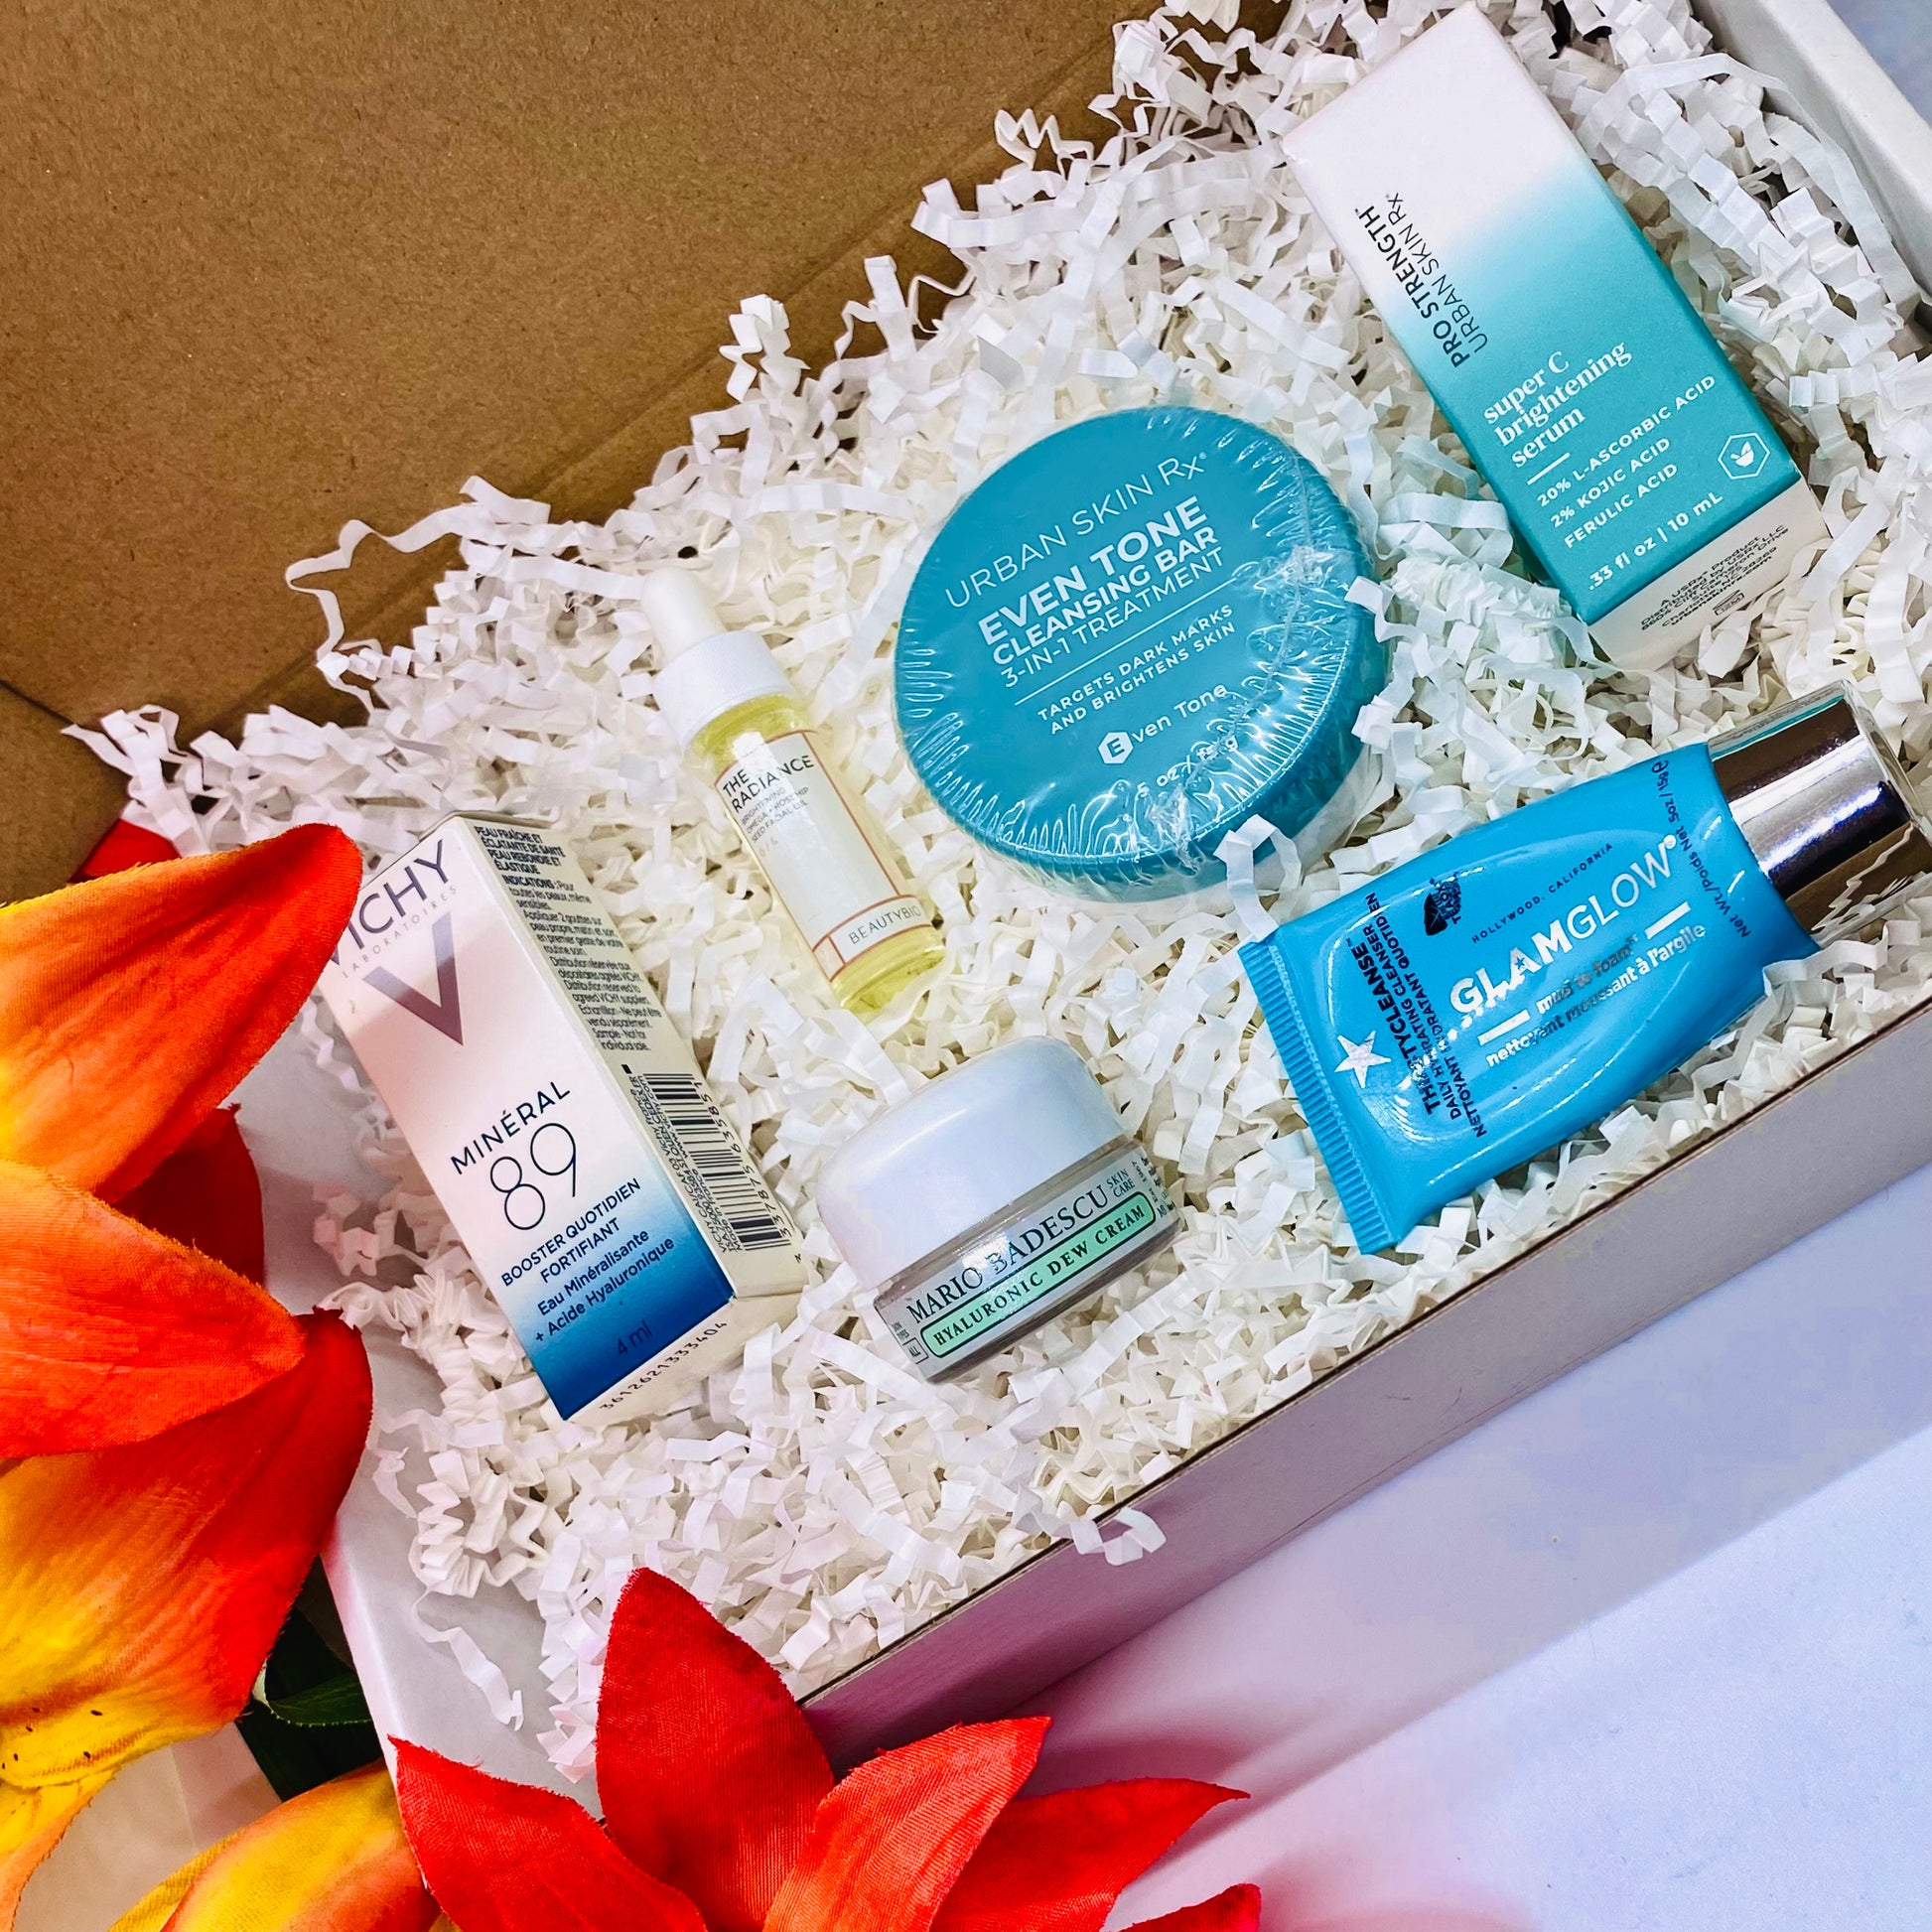 The ultimate skincare anti aging bundle with top premium brands for all skin type. Excellent gift and very limit, only available at Fa etreasures.com